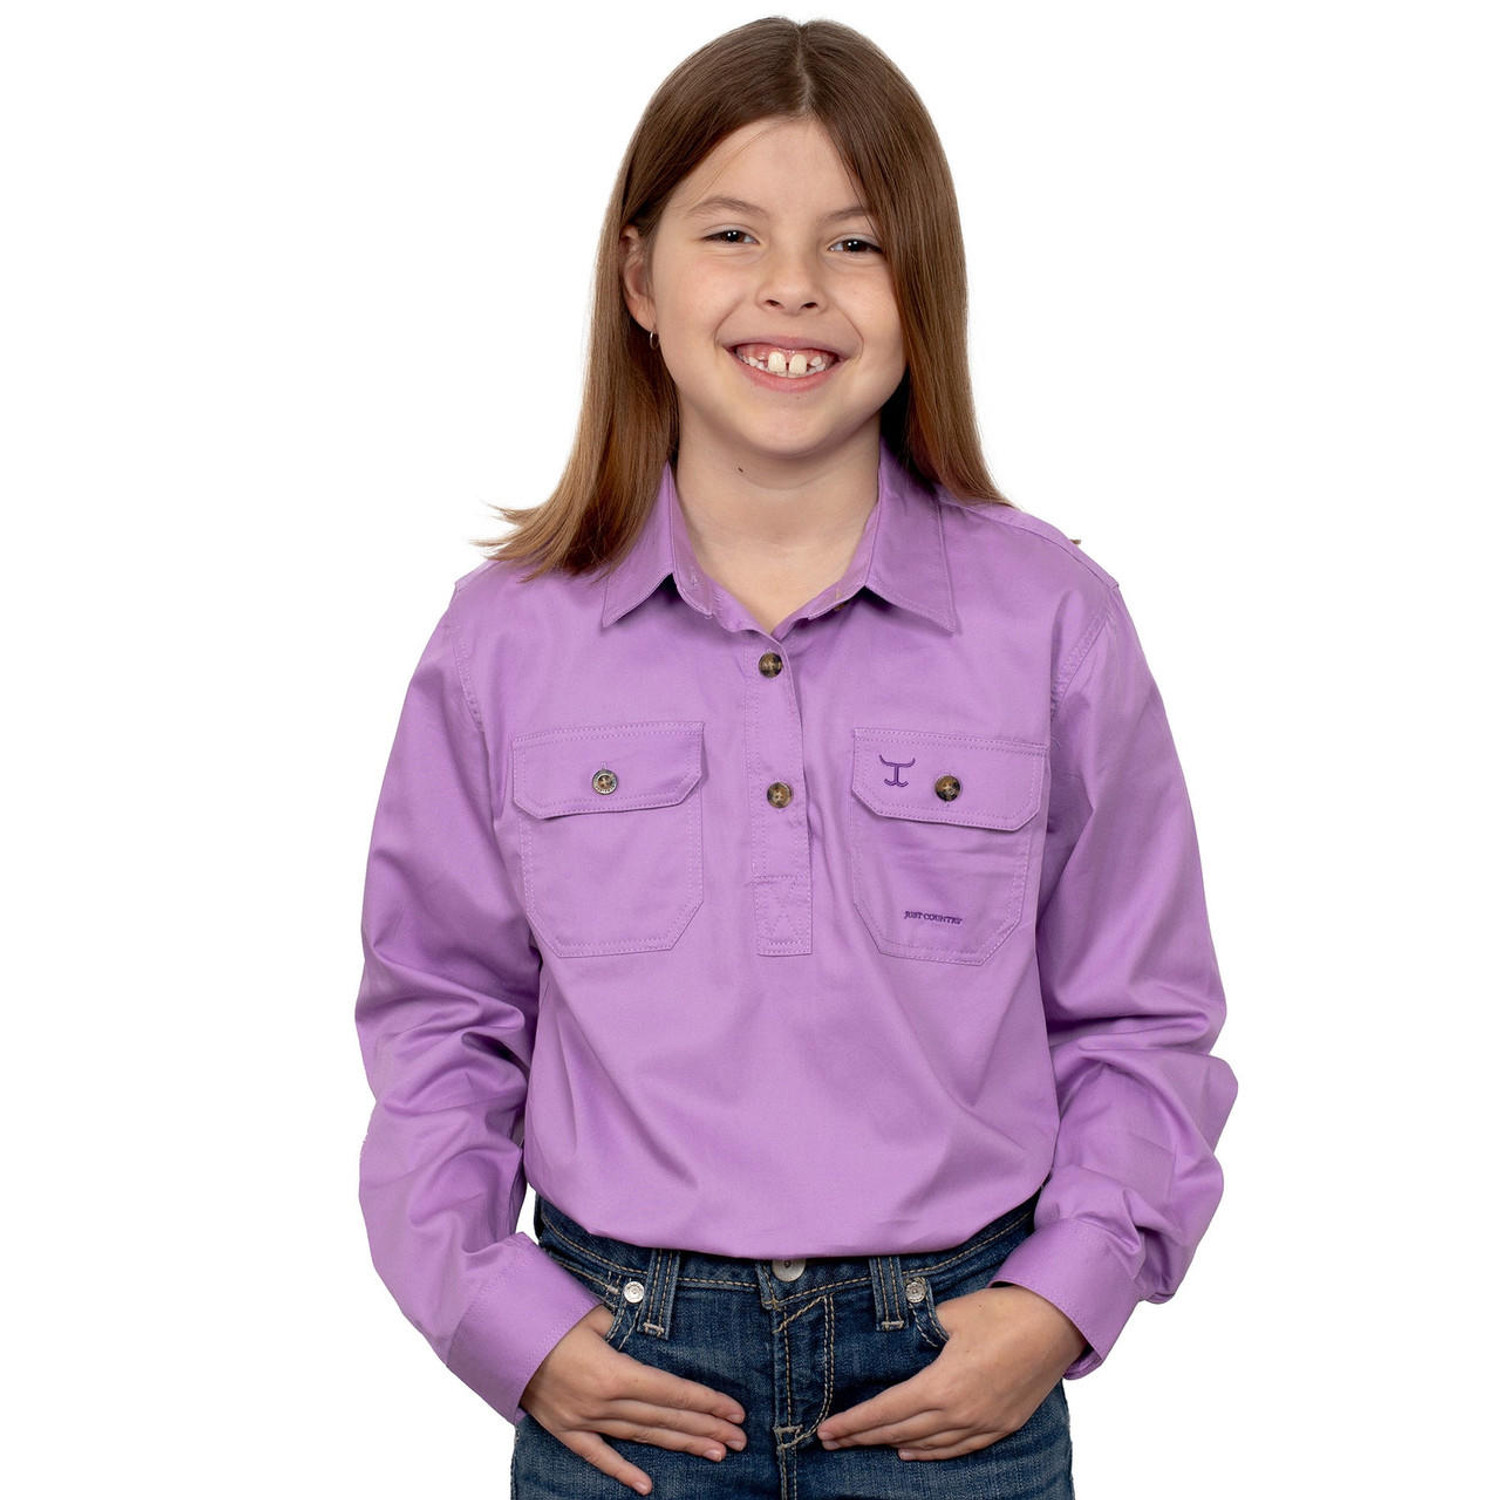 Just Country 60606 KIDS Kenzie Longsleeve Closed Front Shirt in Orchid Bulk Buy Deal, Buy 4 or more Just Country Kids Shirts for dollar39.95 Each